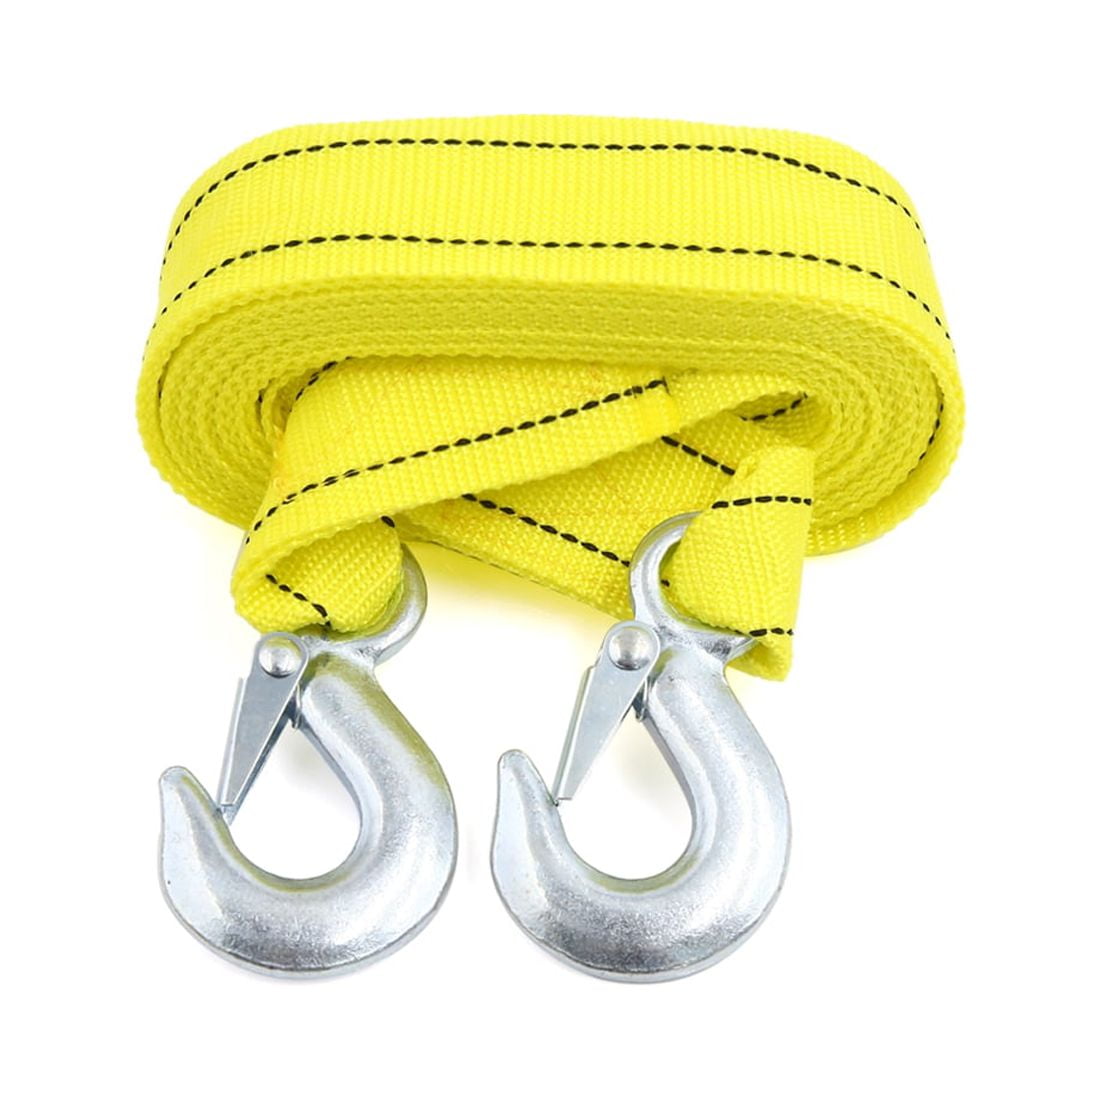 Unique Bargains 4m 3 Tons Car Vehicle Boat Tow Strap Towing Belt Rope Cable  String with Hooks 